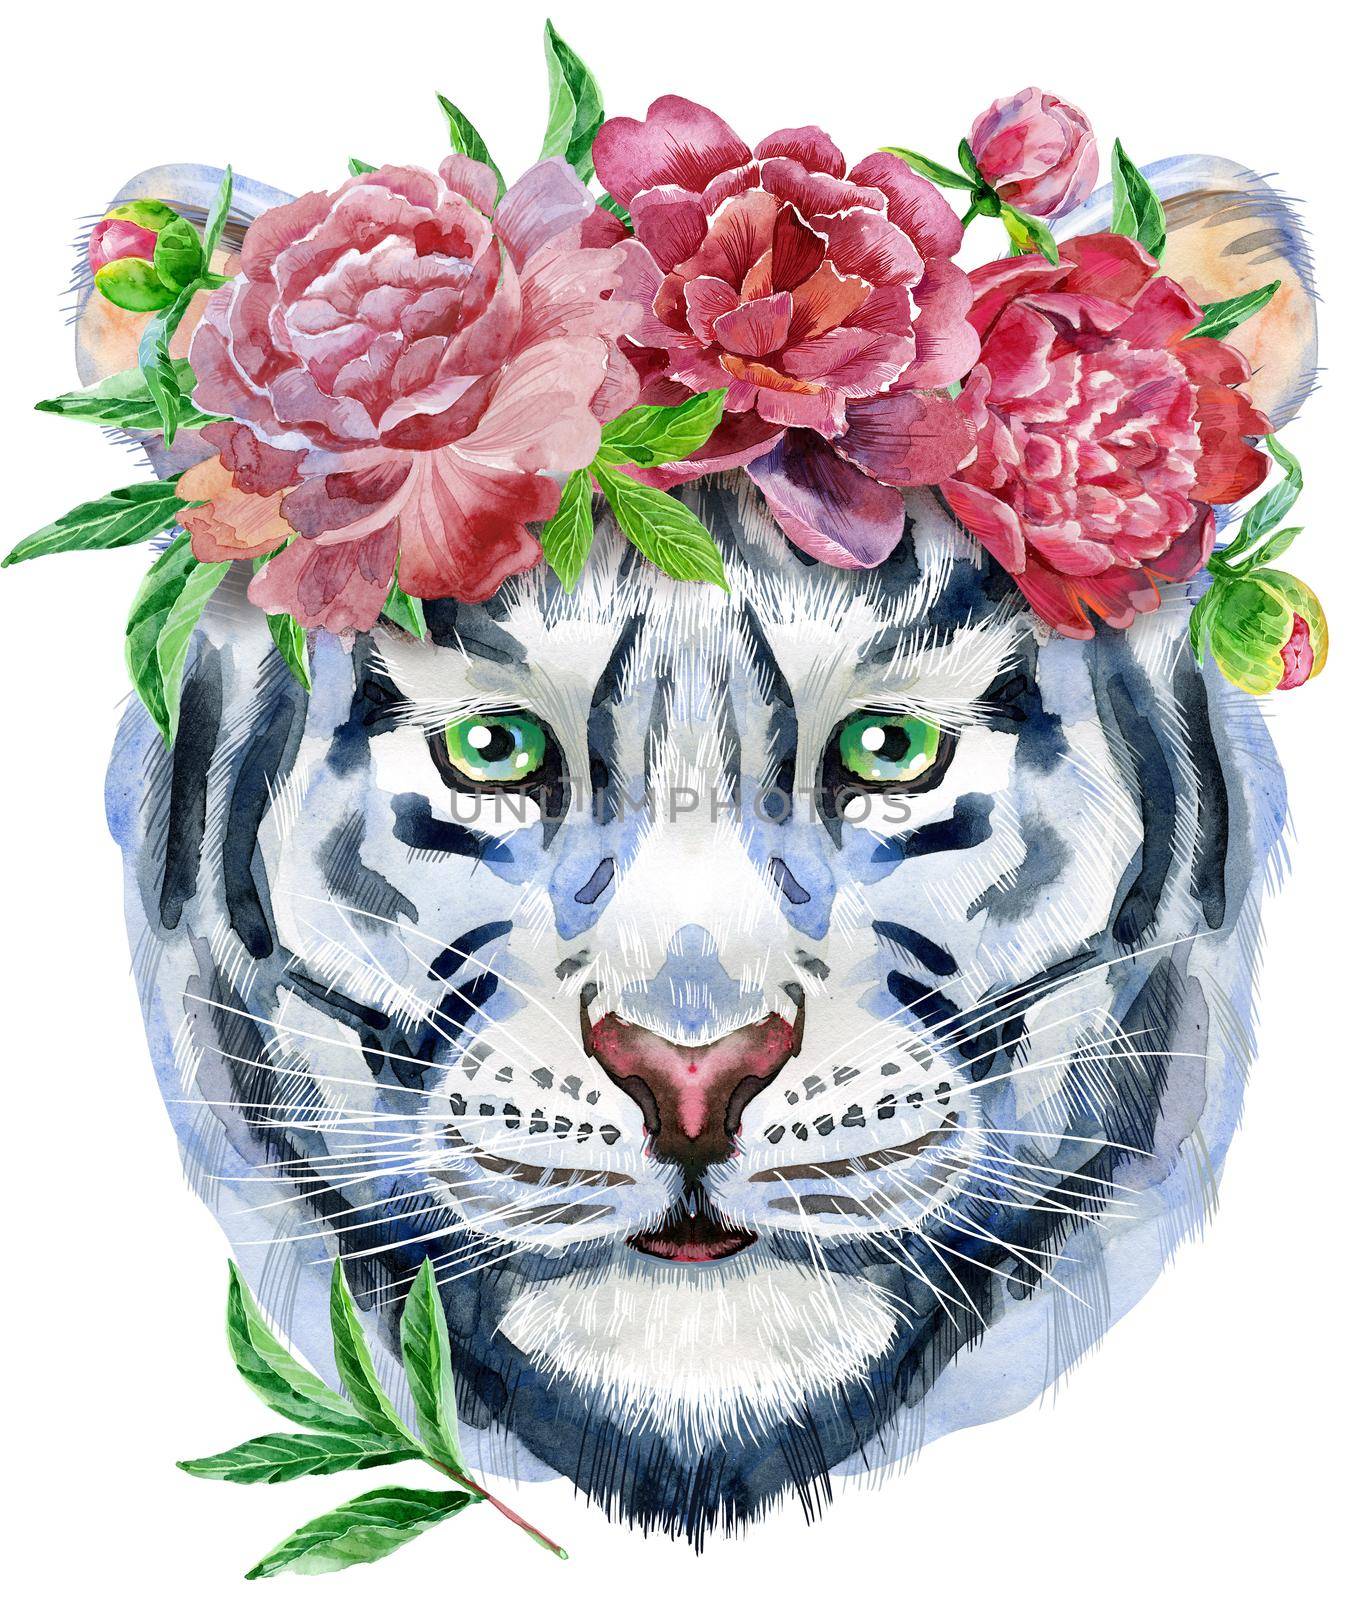 Colorful white tiger in wreath of peonies. Wild animal watercolor illustration on white background by NataOmsk